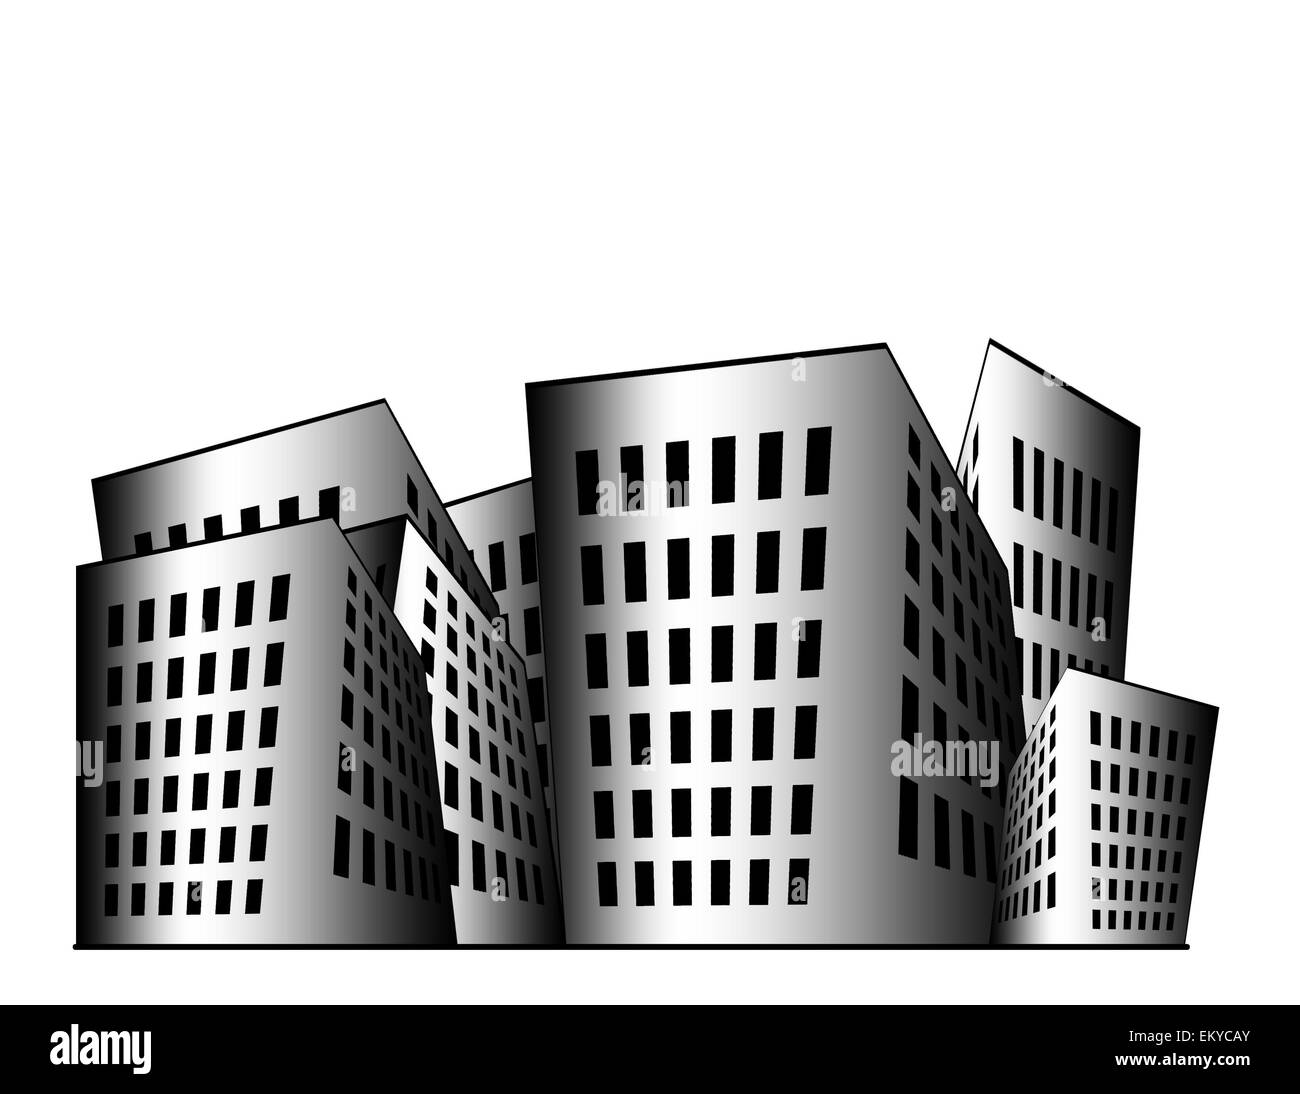 Building illustration in black and white gradient with white space. Stock Photo